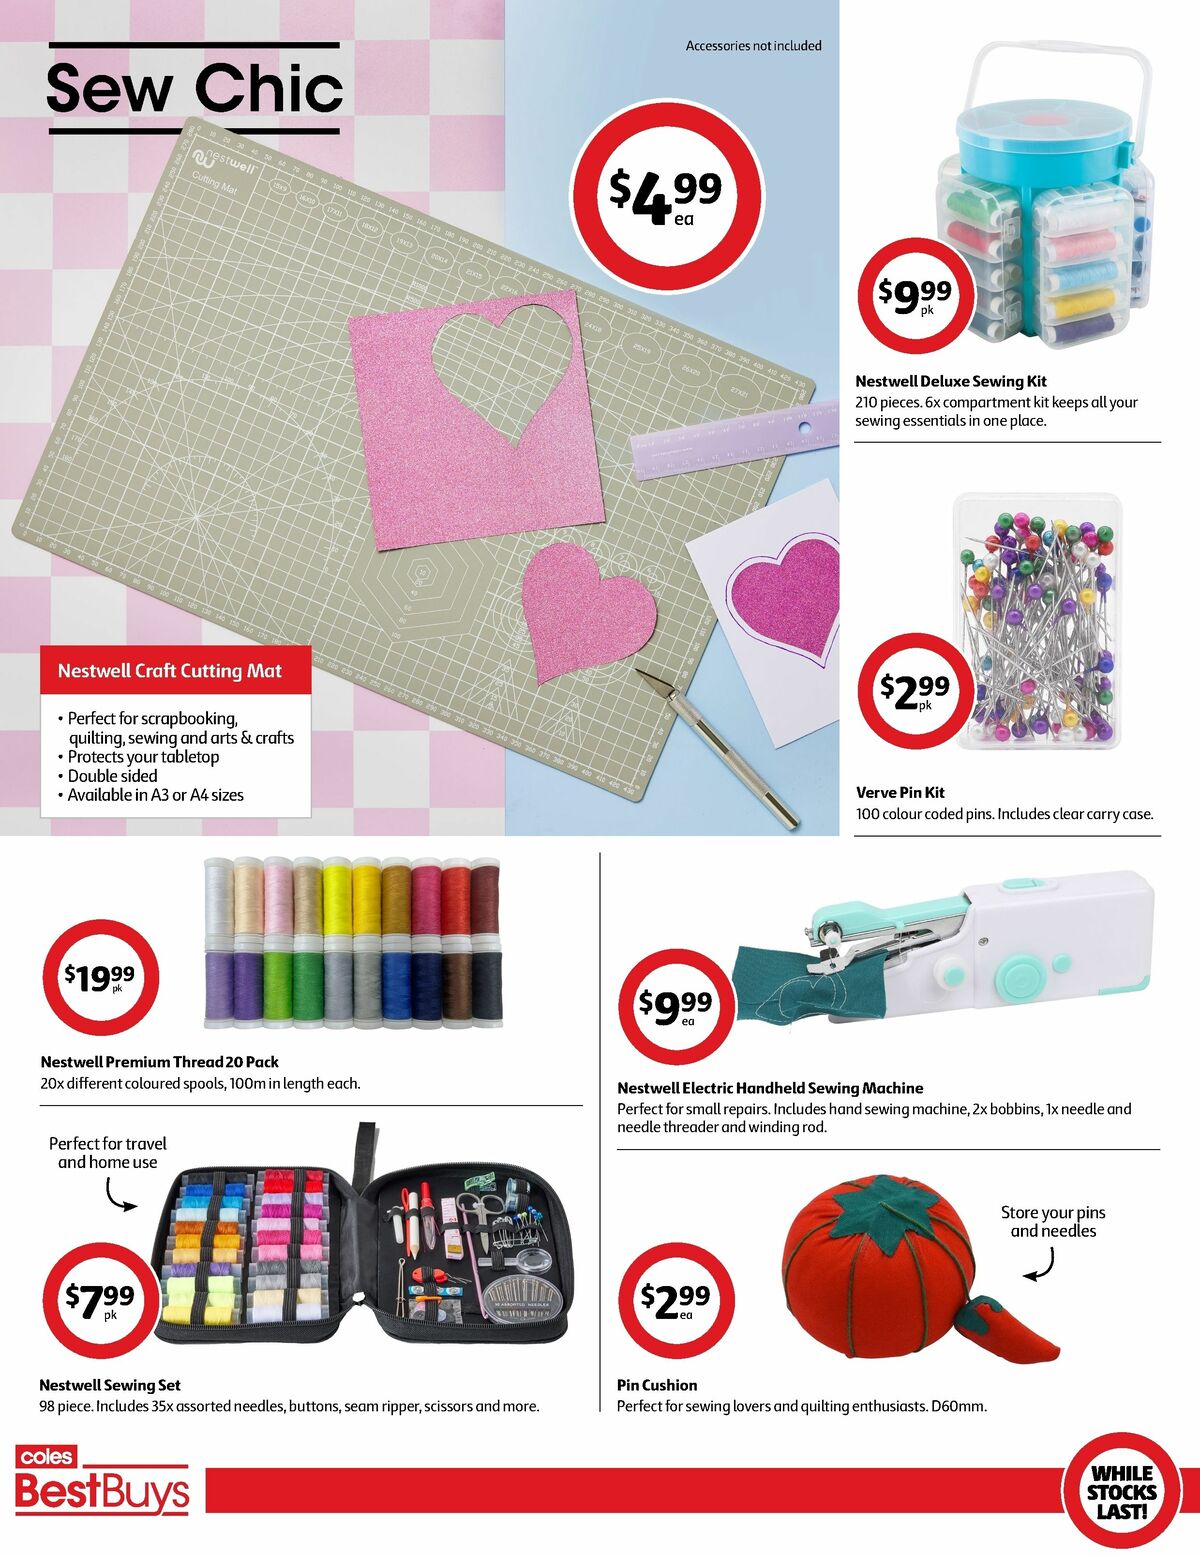 Coles Best Buys - Sewing & Craft Catalogues from 19 April